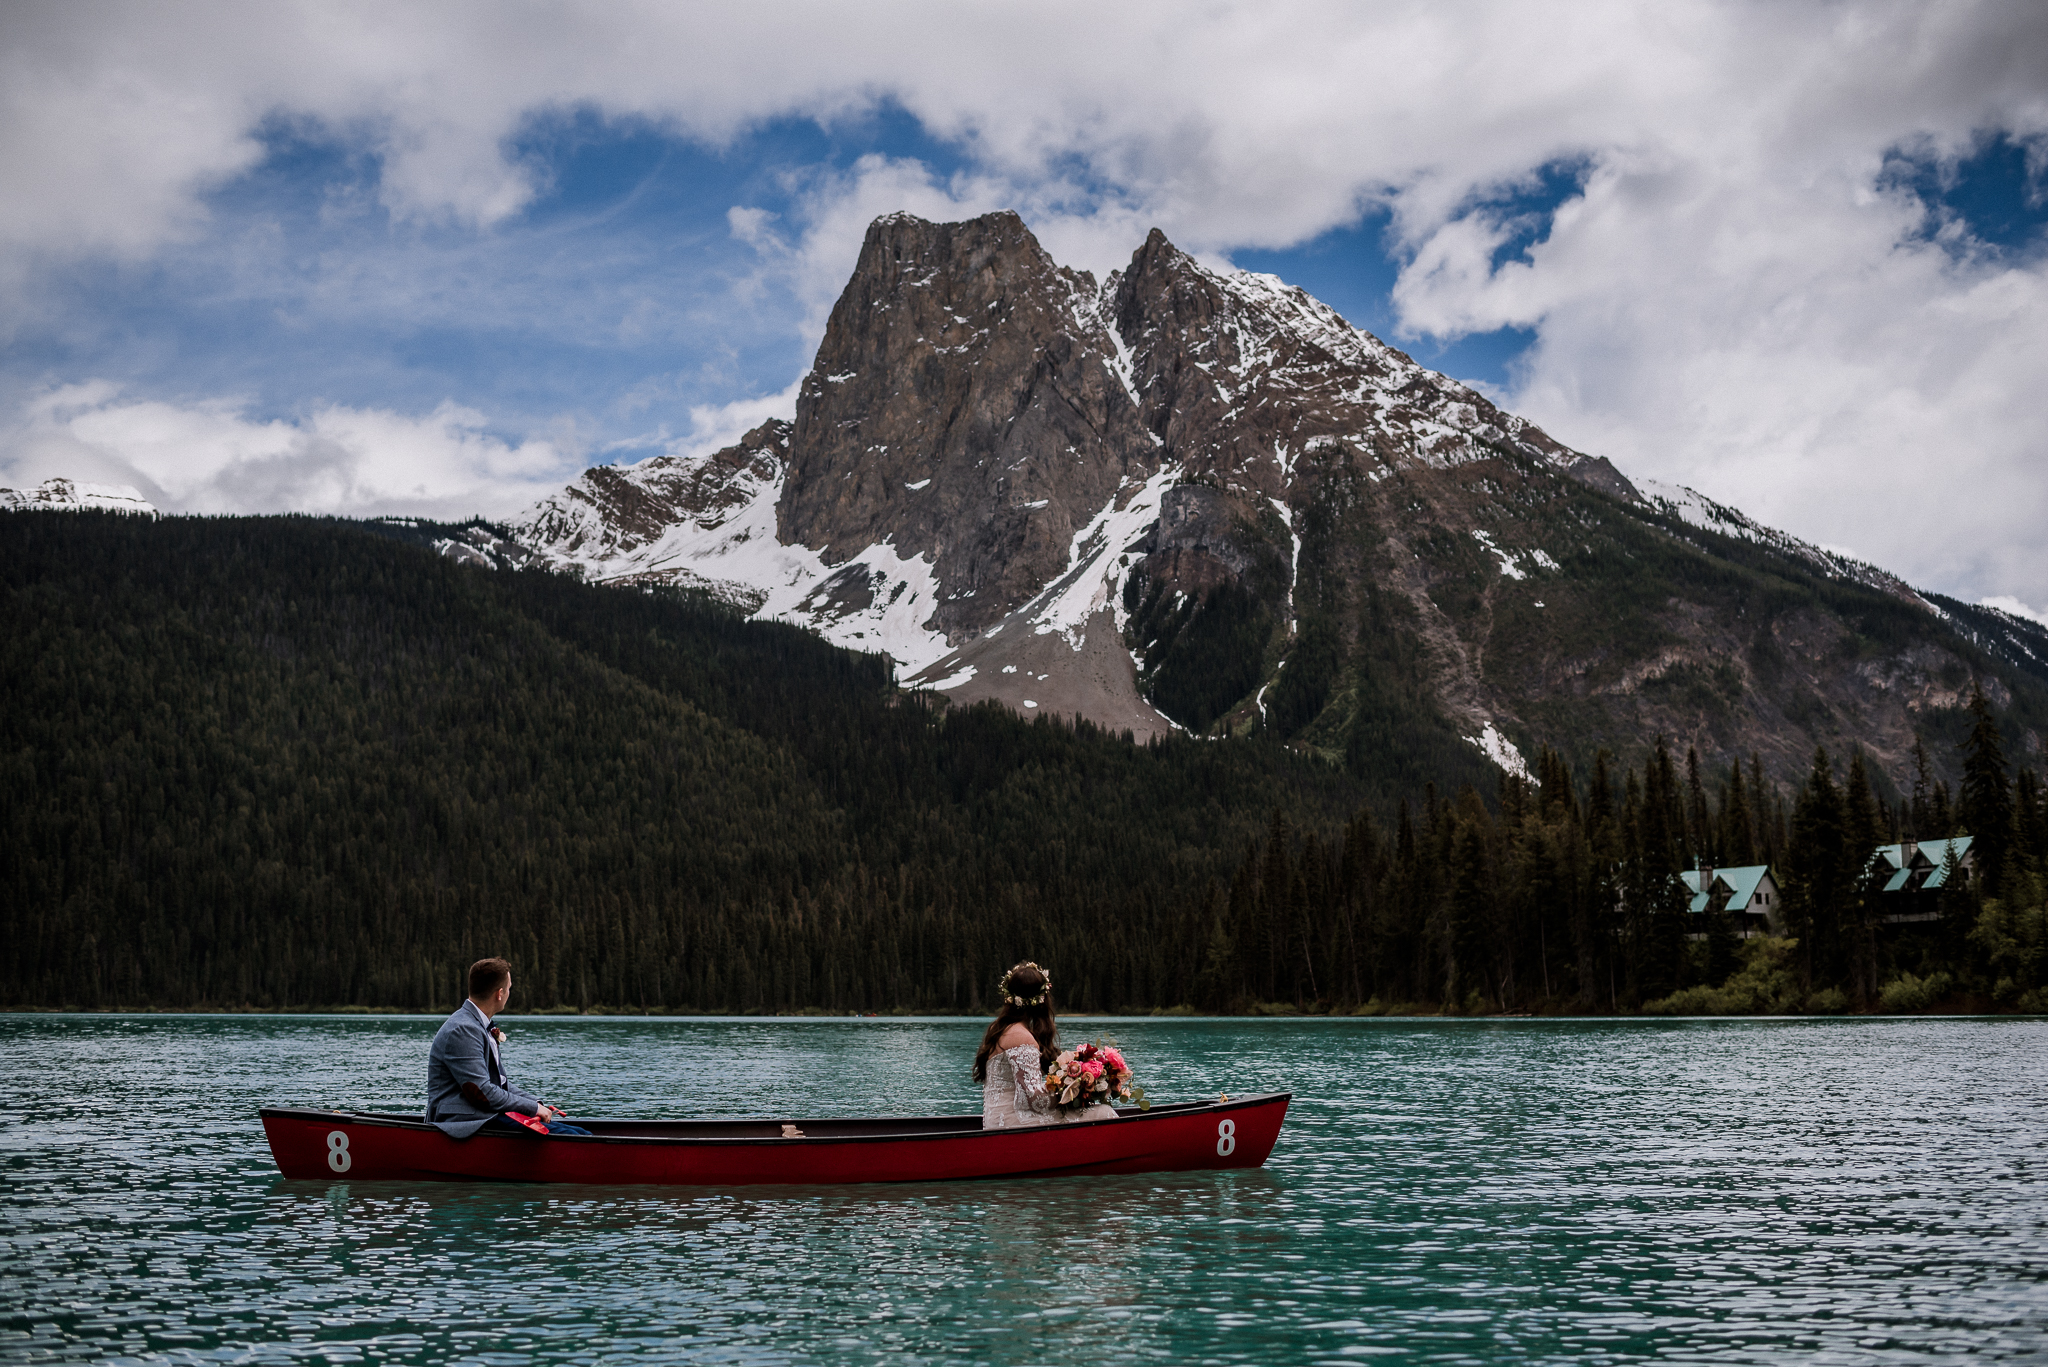 Bride and groom in red canoe at Emerald Lake, BC